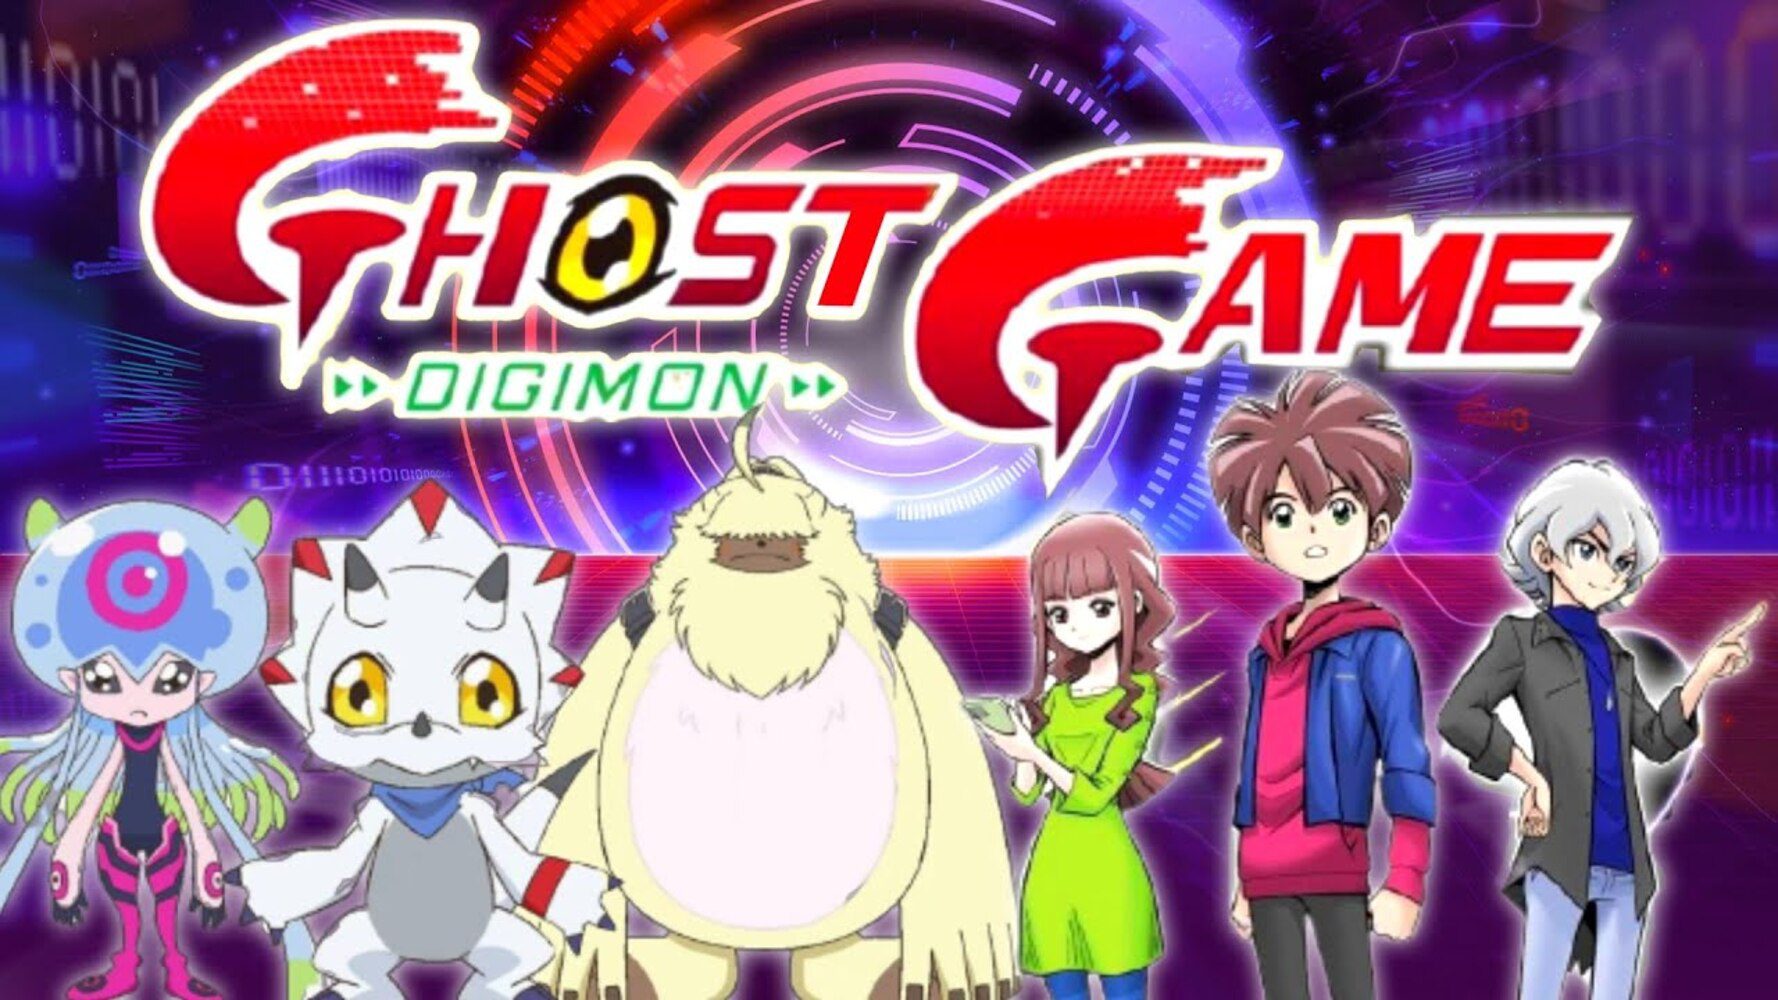 Digimon Ghost Game Episode 35 Release Date